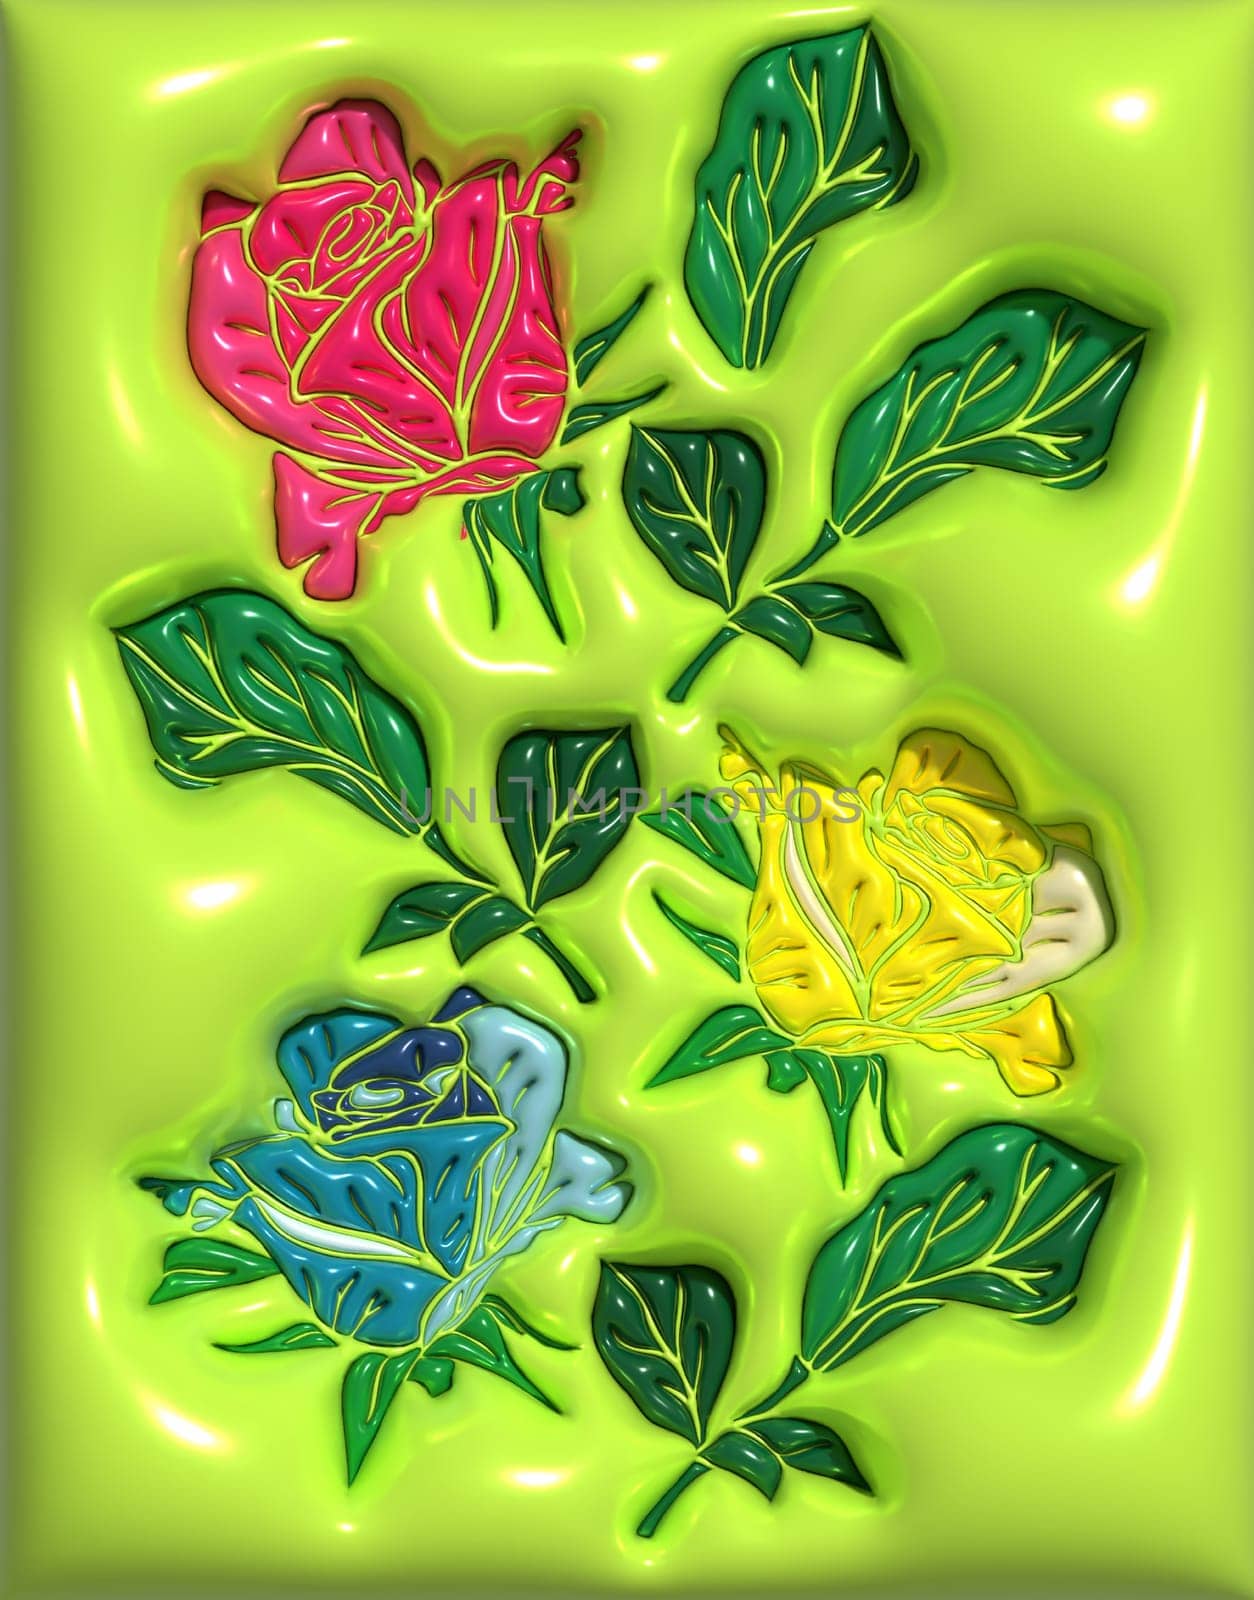 Buds of multi-colored roses on a green background, 3D rendering illustration